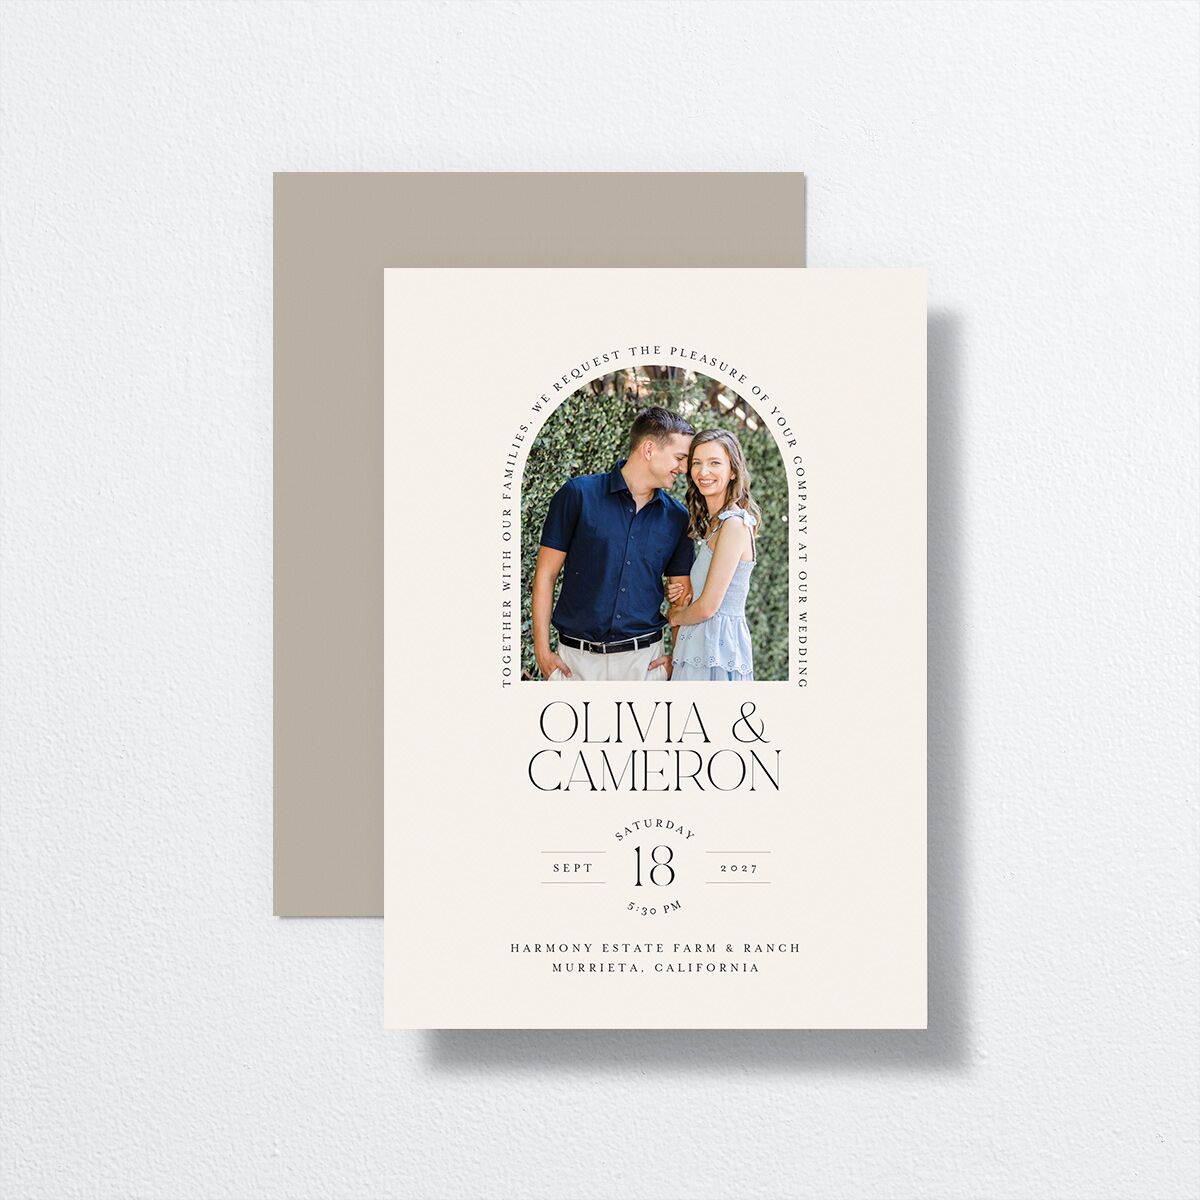 Photo Arch Wedding Invitations front-and-back in cream